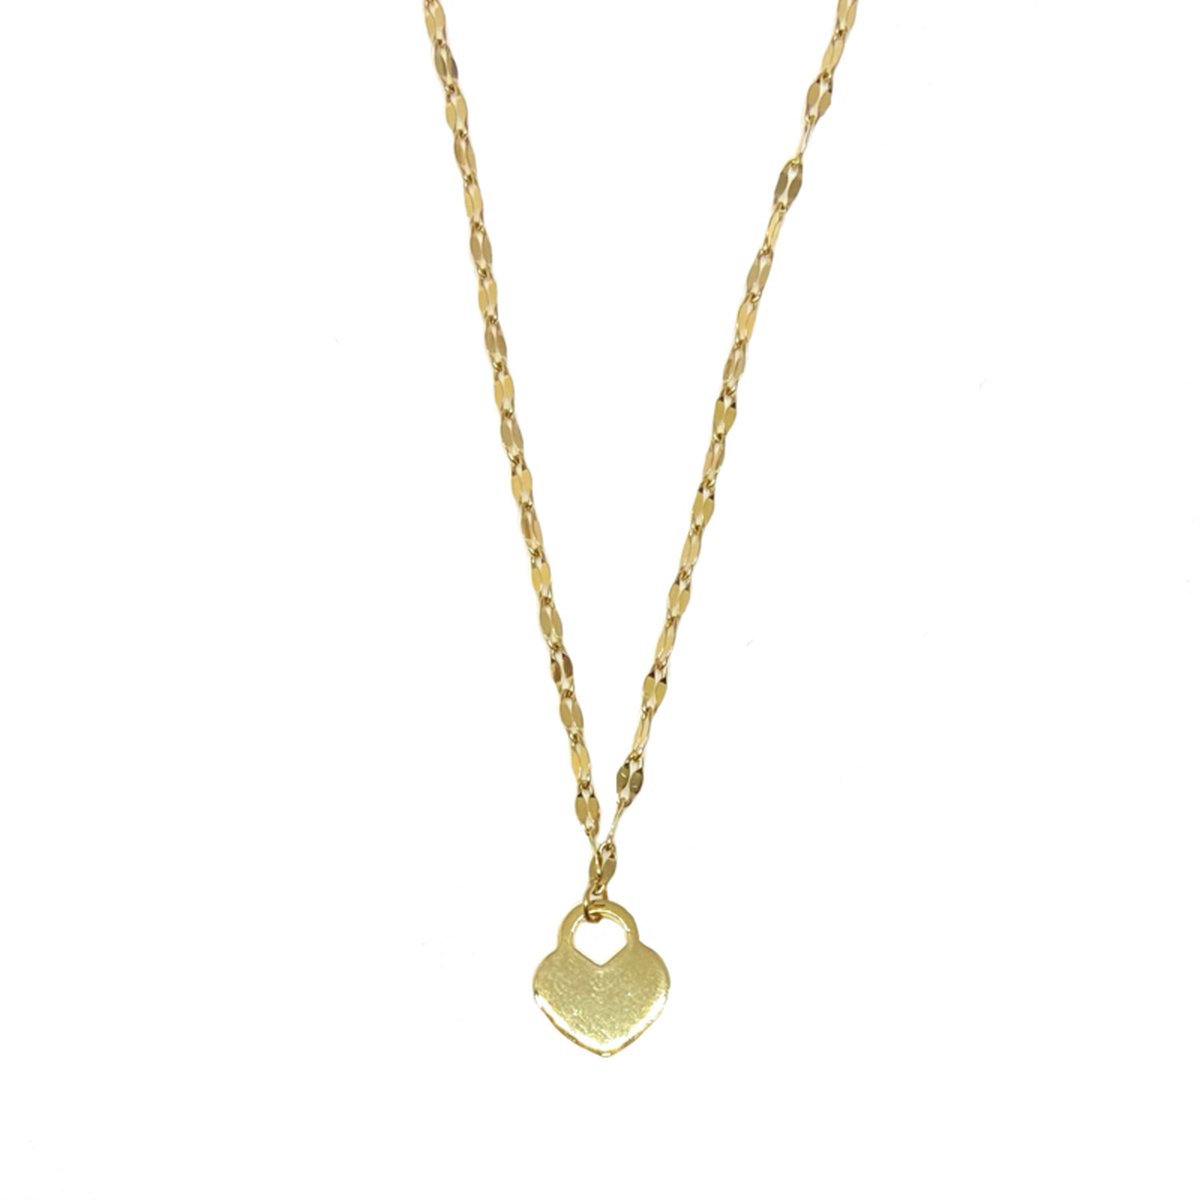 Life is good necklace - gold